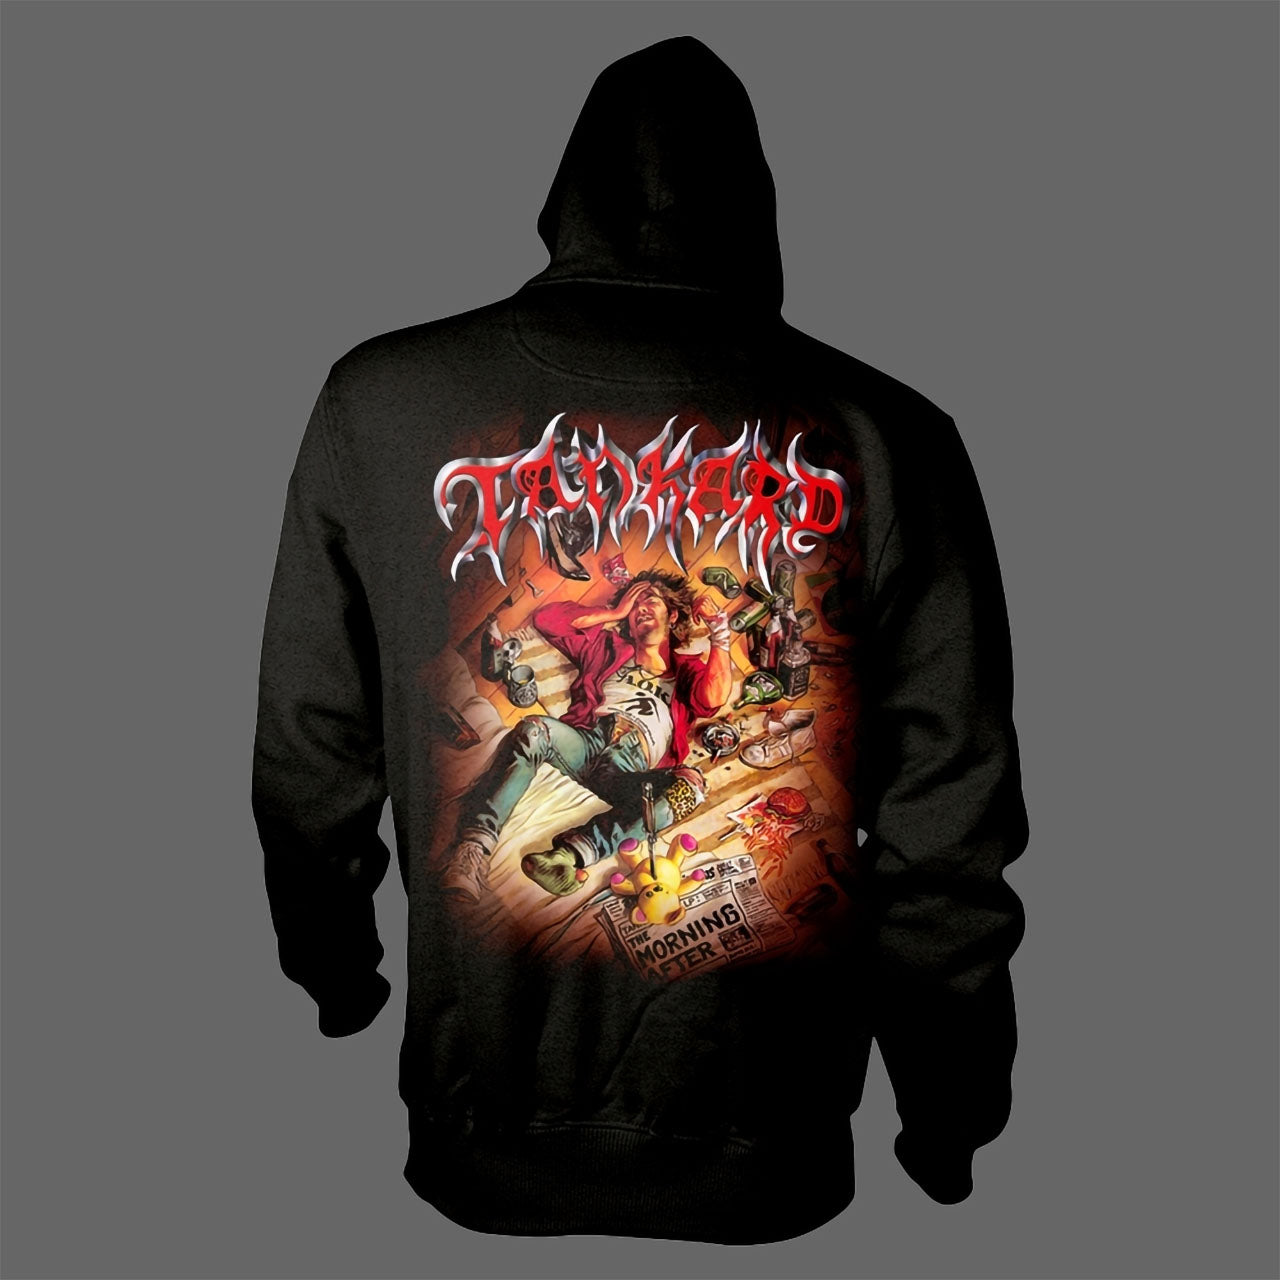 Tankard - The Morning After (Full Zip Hoodie)